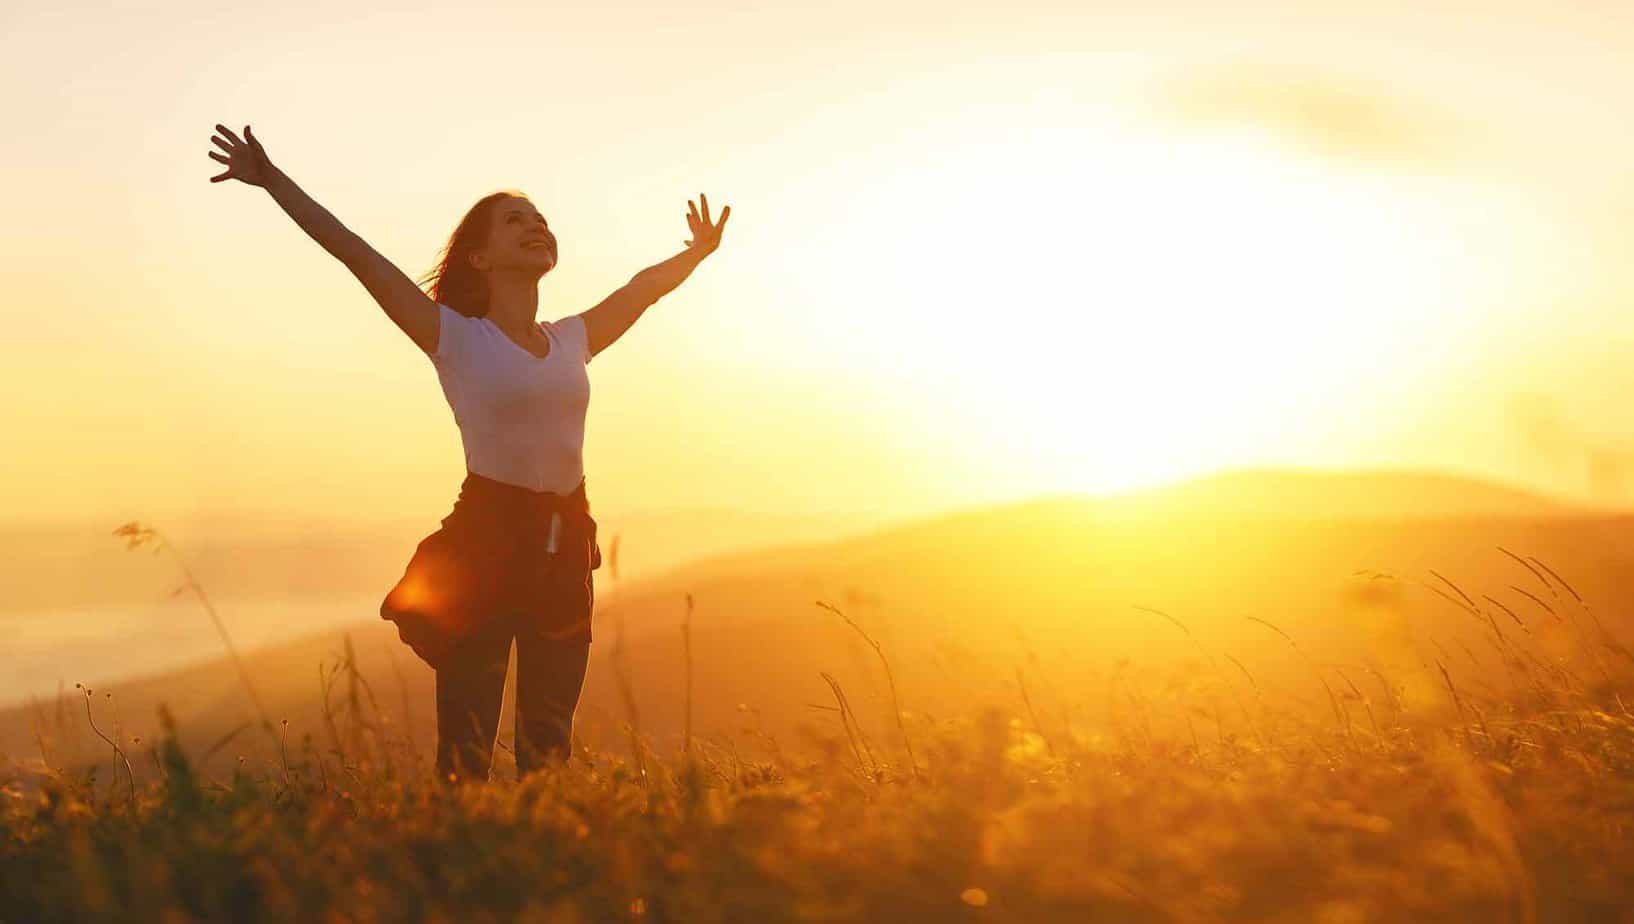 women celebrating recovery standing in the middle of empty field with sunset